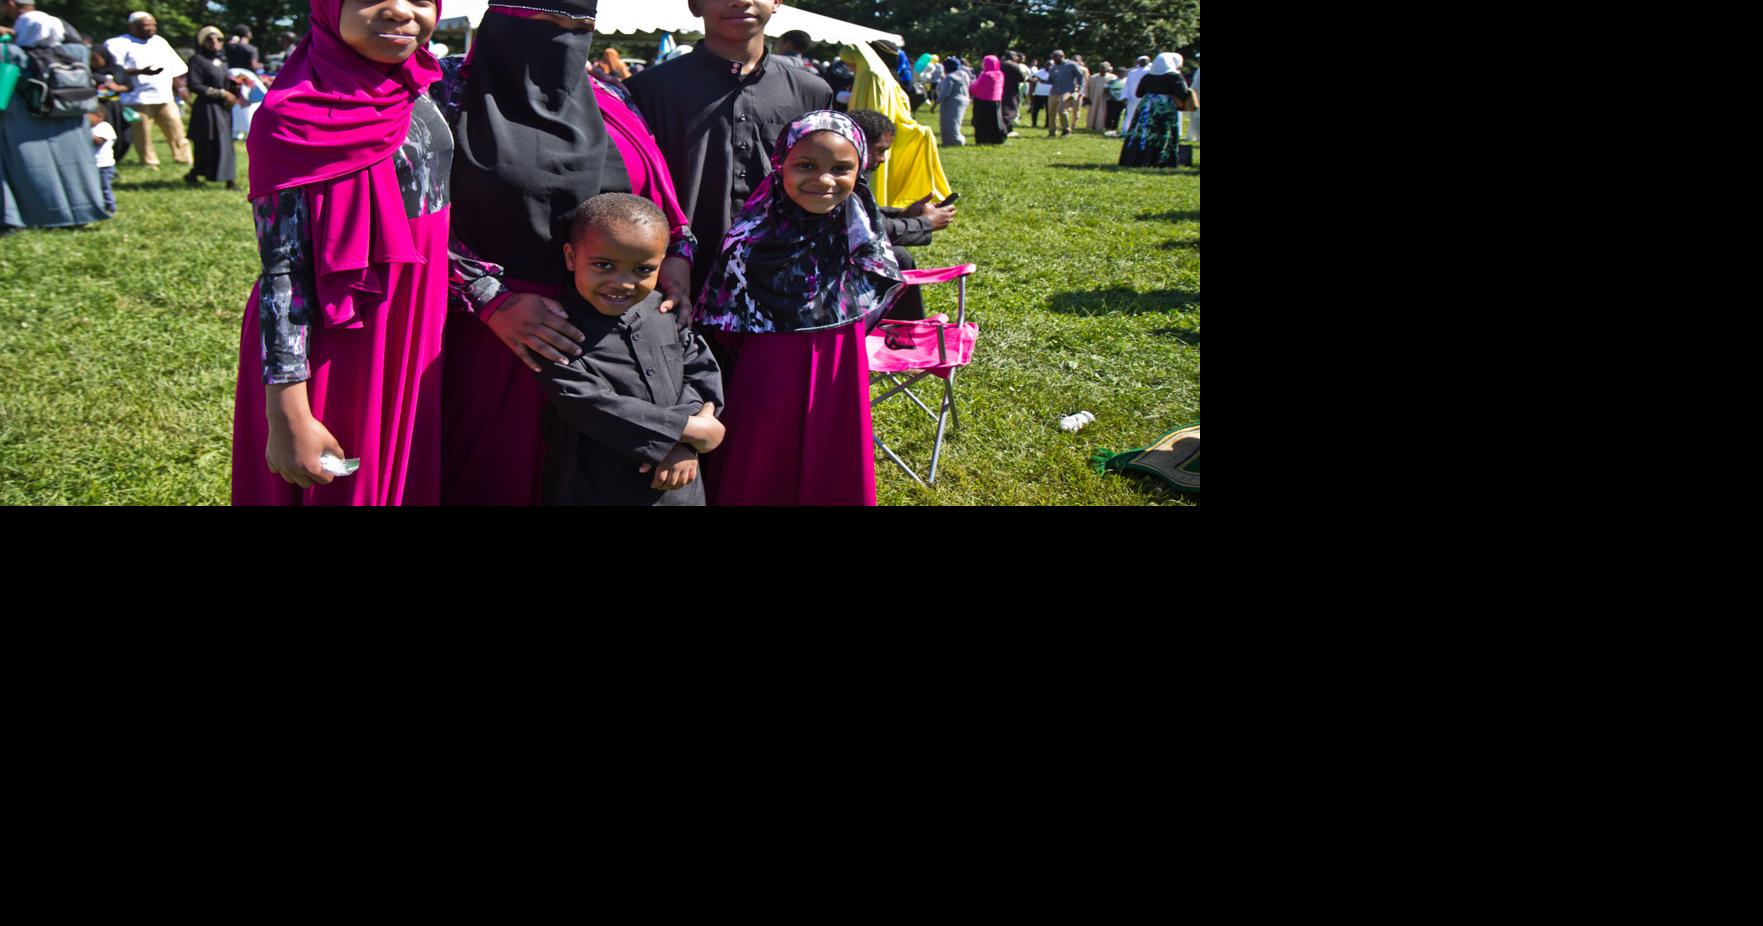 Philadelphia Eid in the Park brings thousands to celebrate the end of